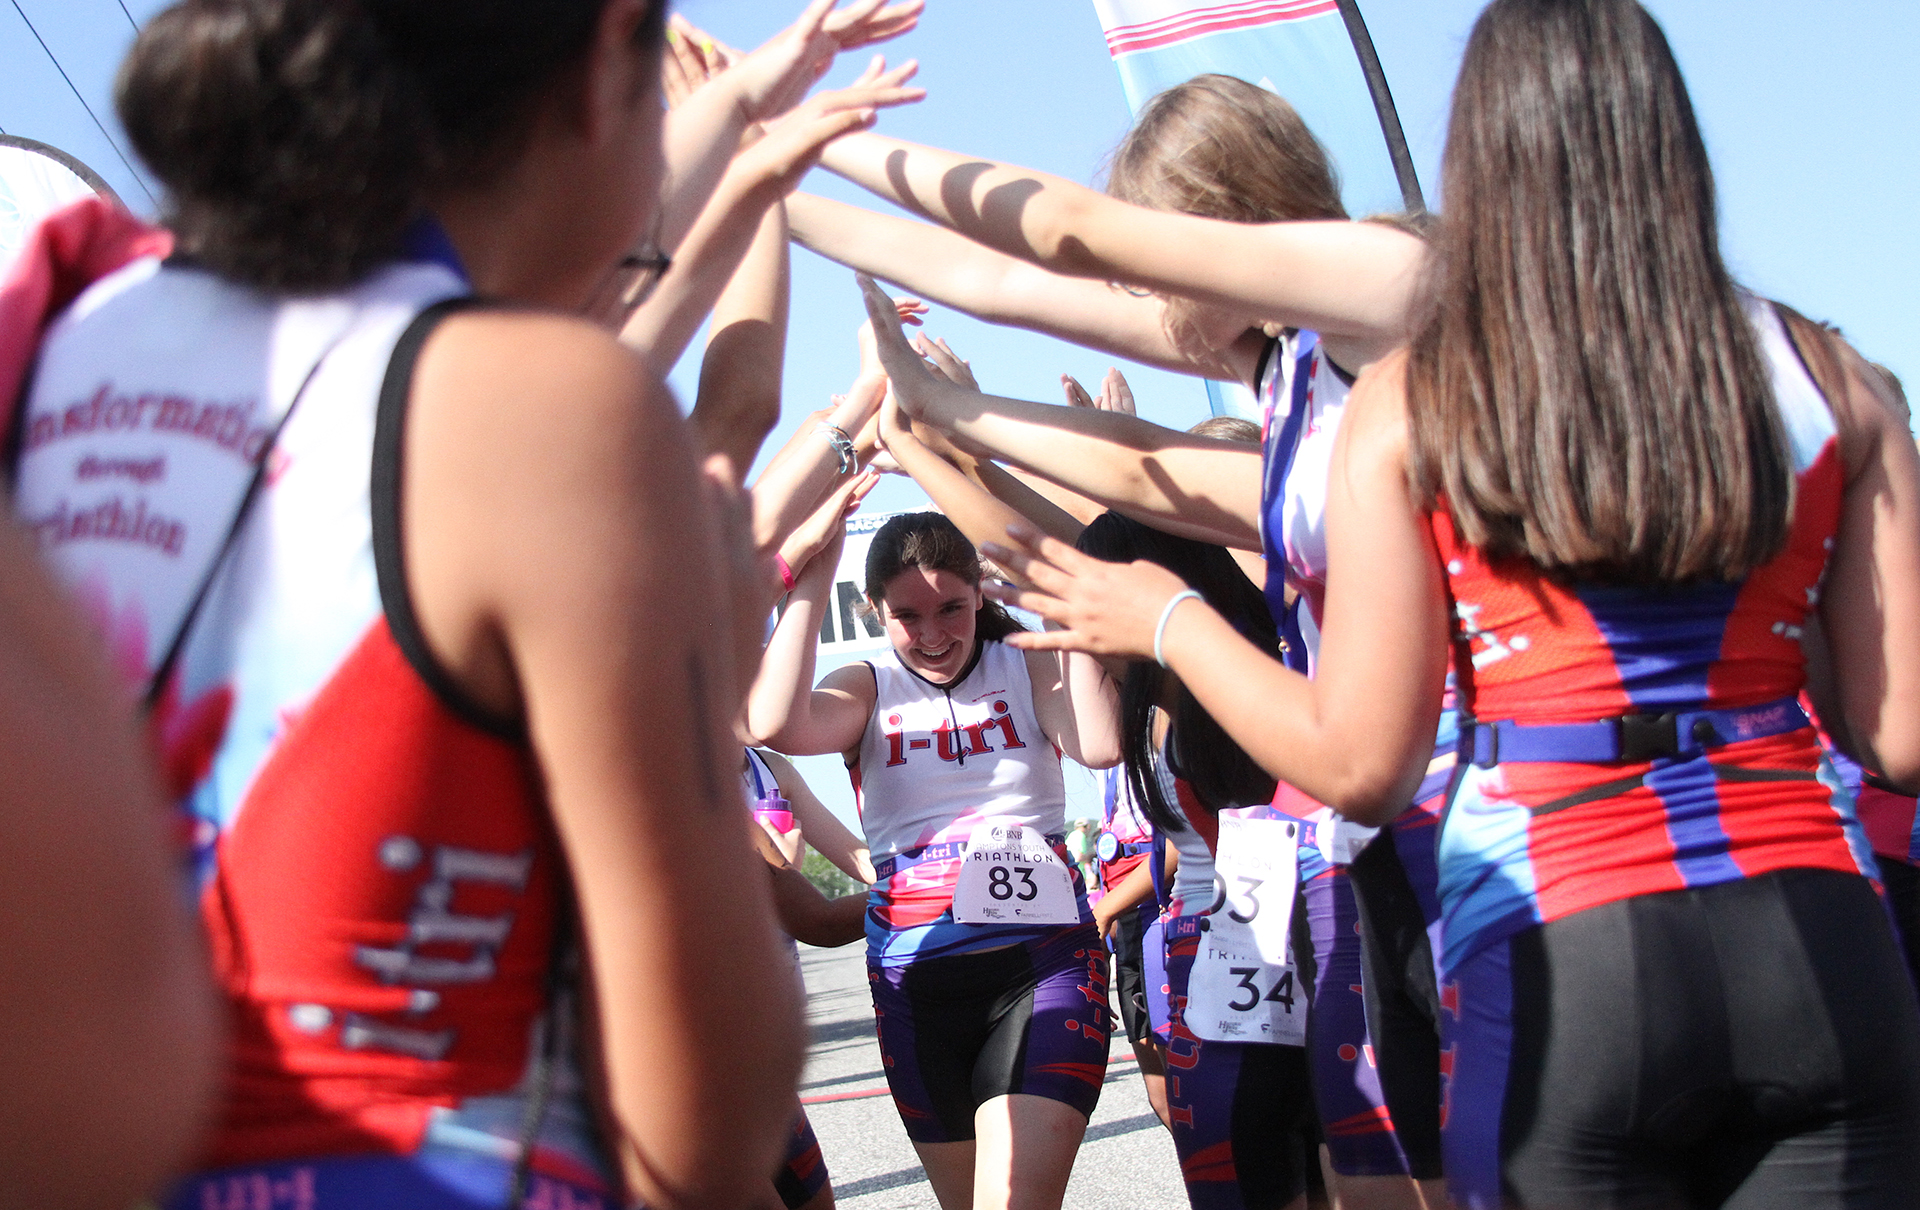 i-Tri Girls competing in the triathlon were met by their peers at the finish line.